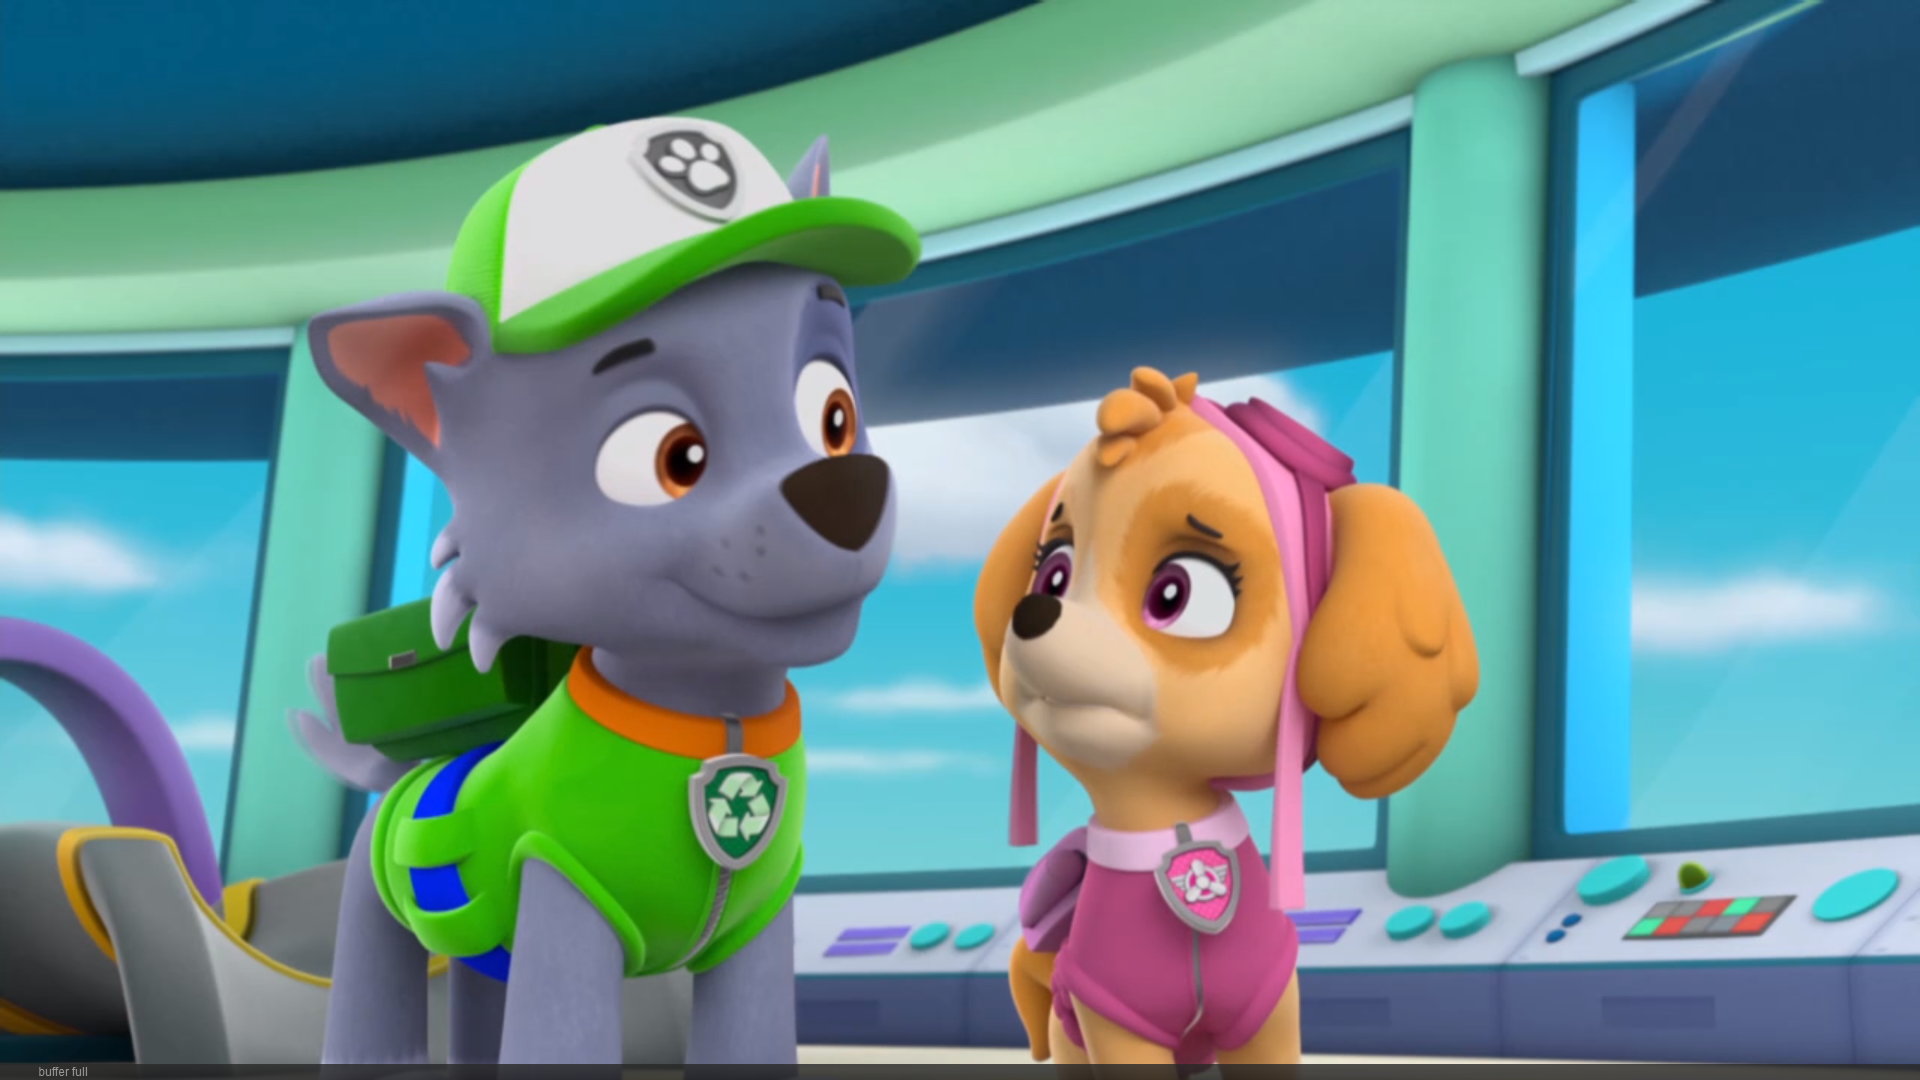 Paw Patrol Wallpapers High Quality | Download Free